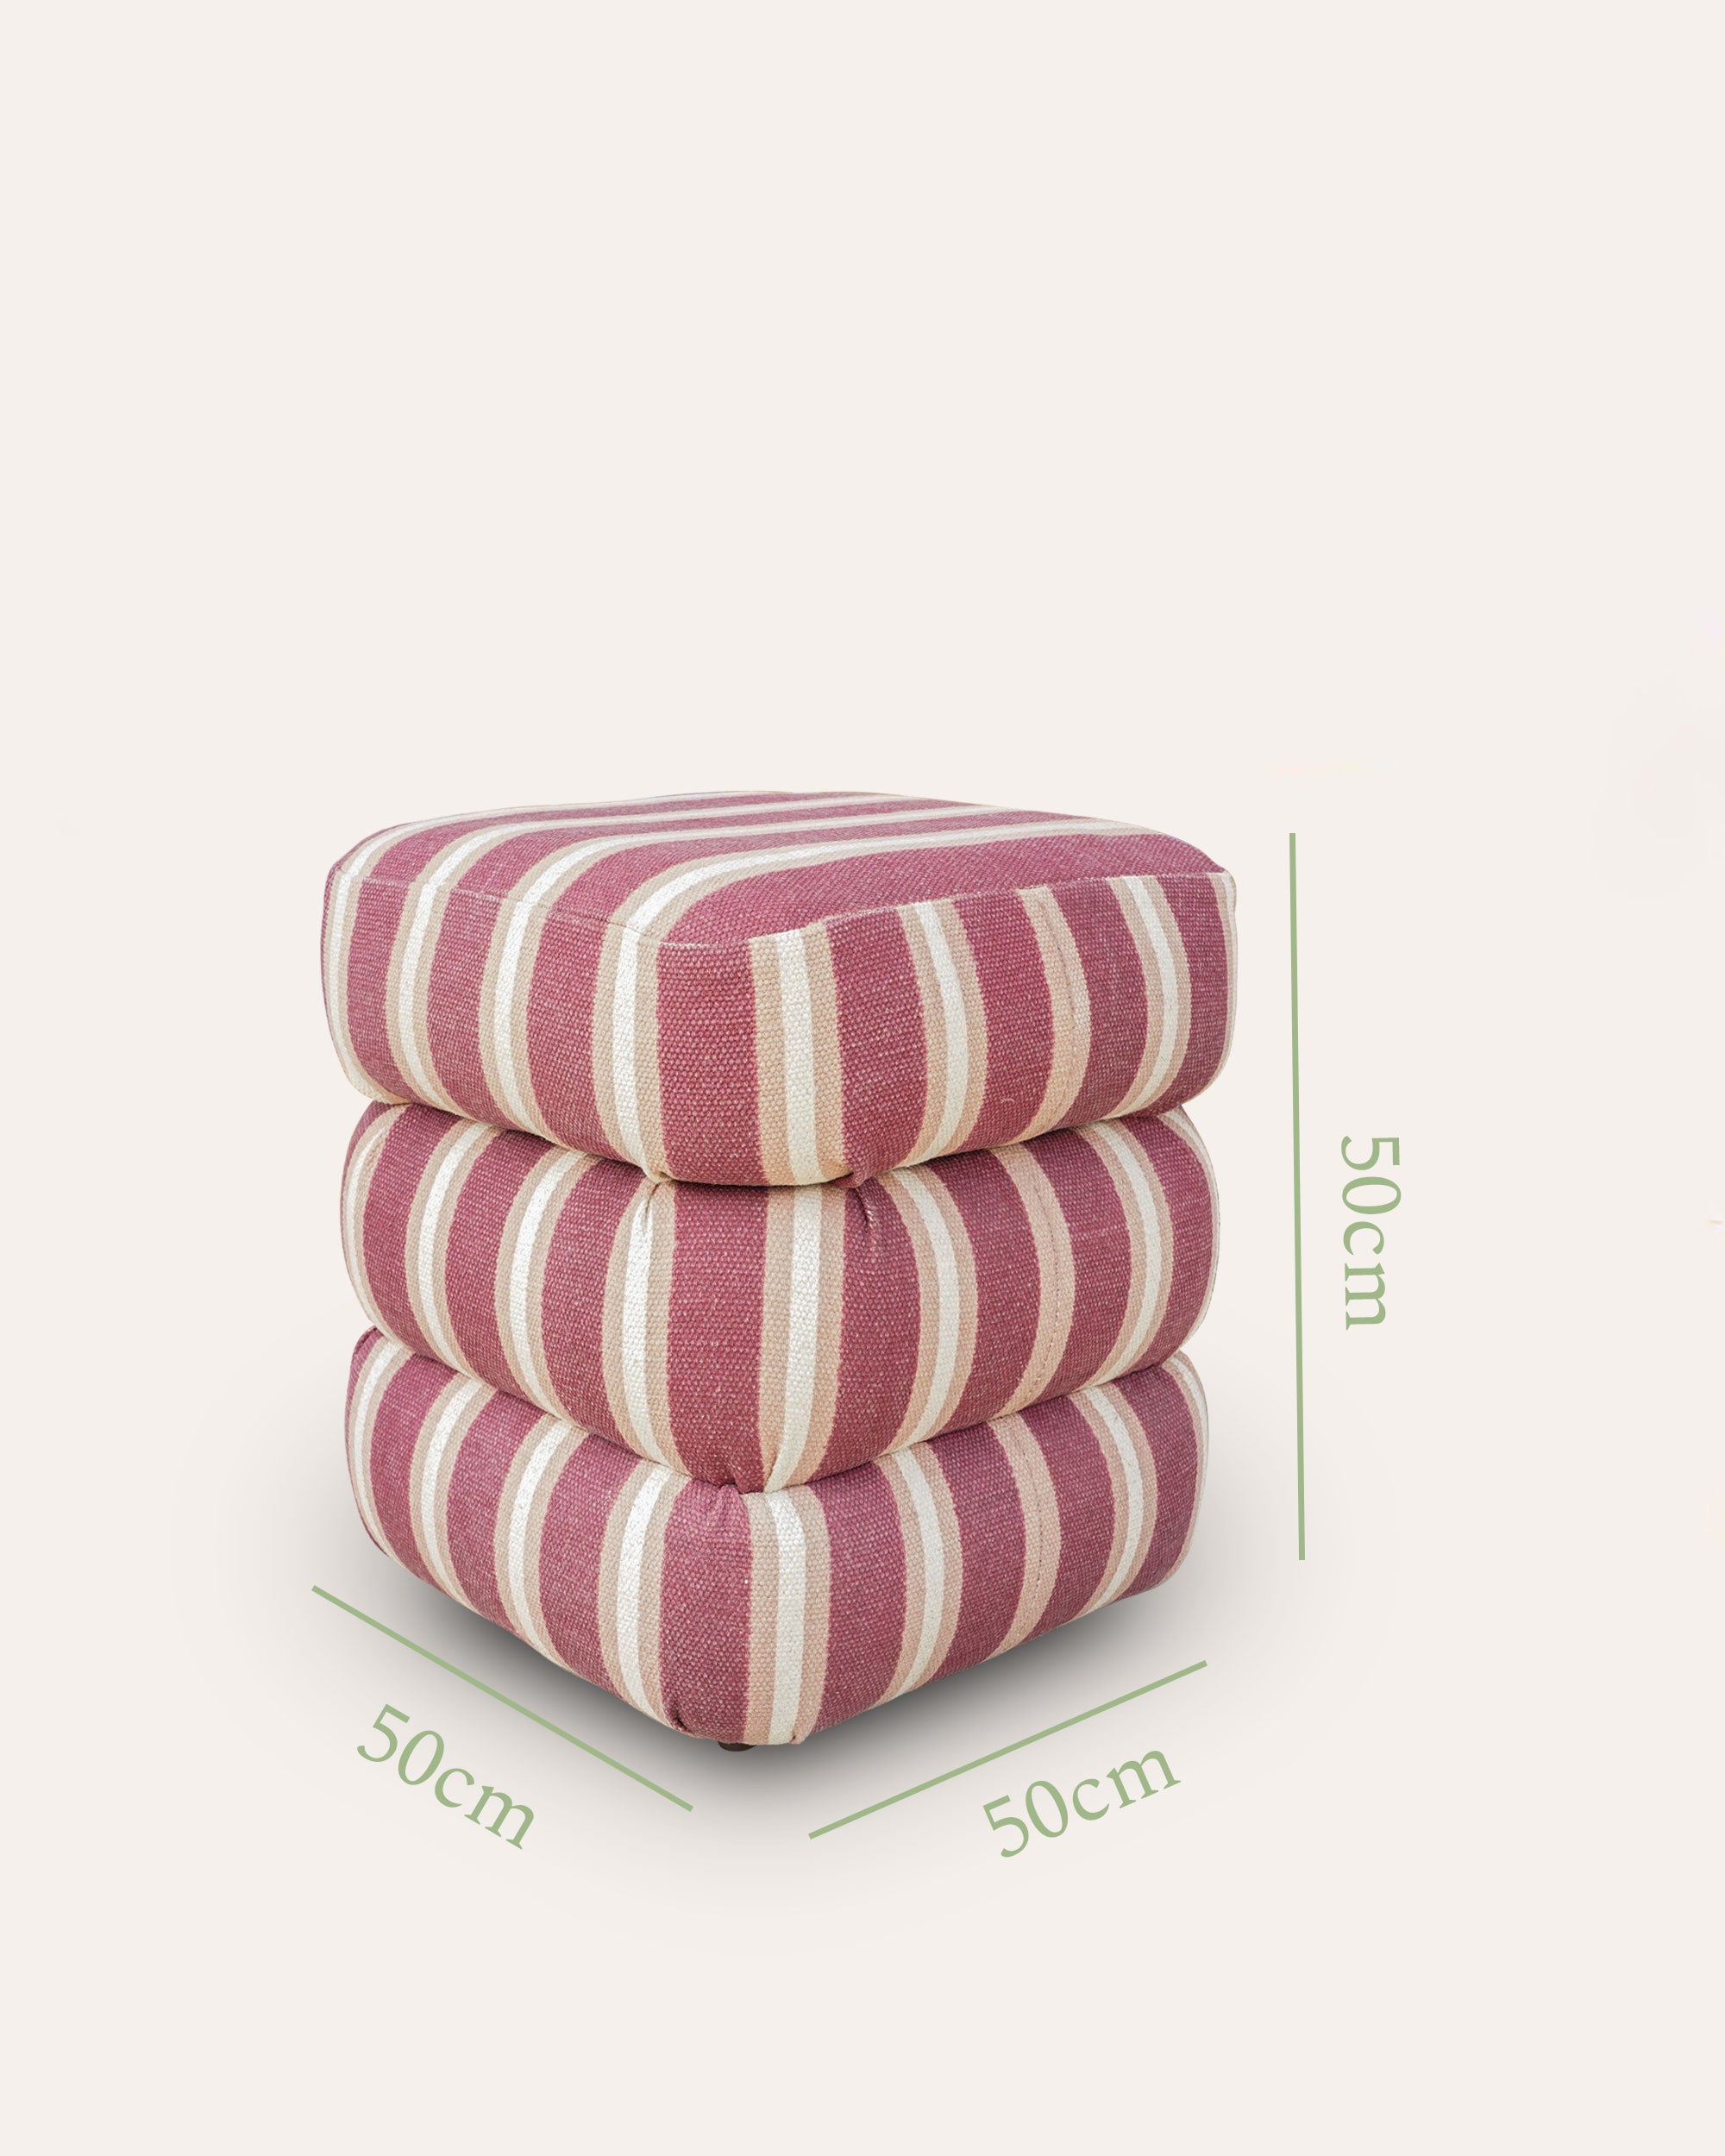 The Stripey Stool - The Pink and Red